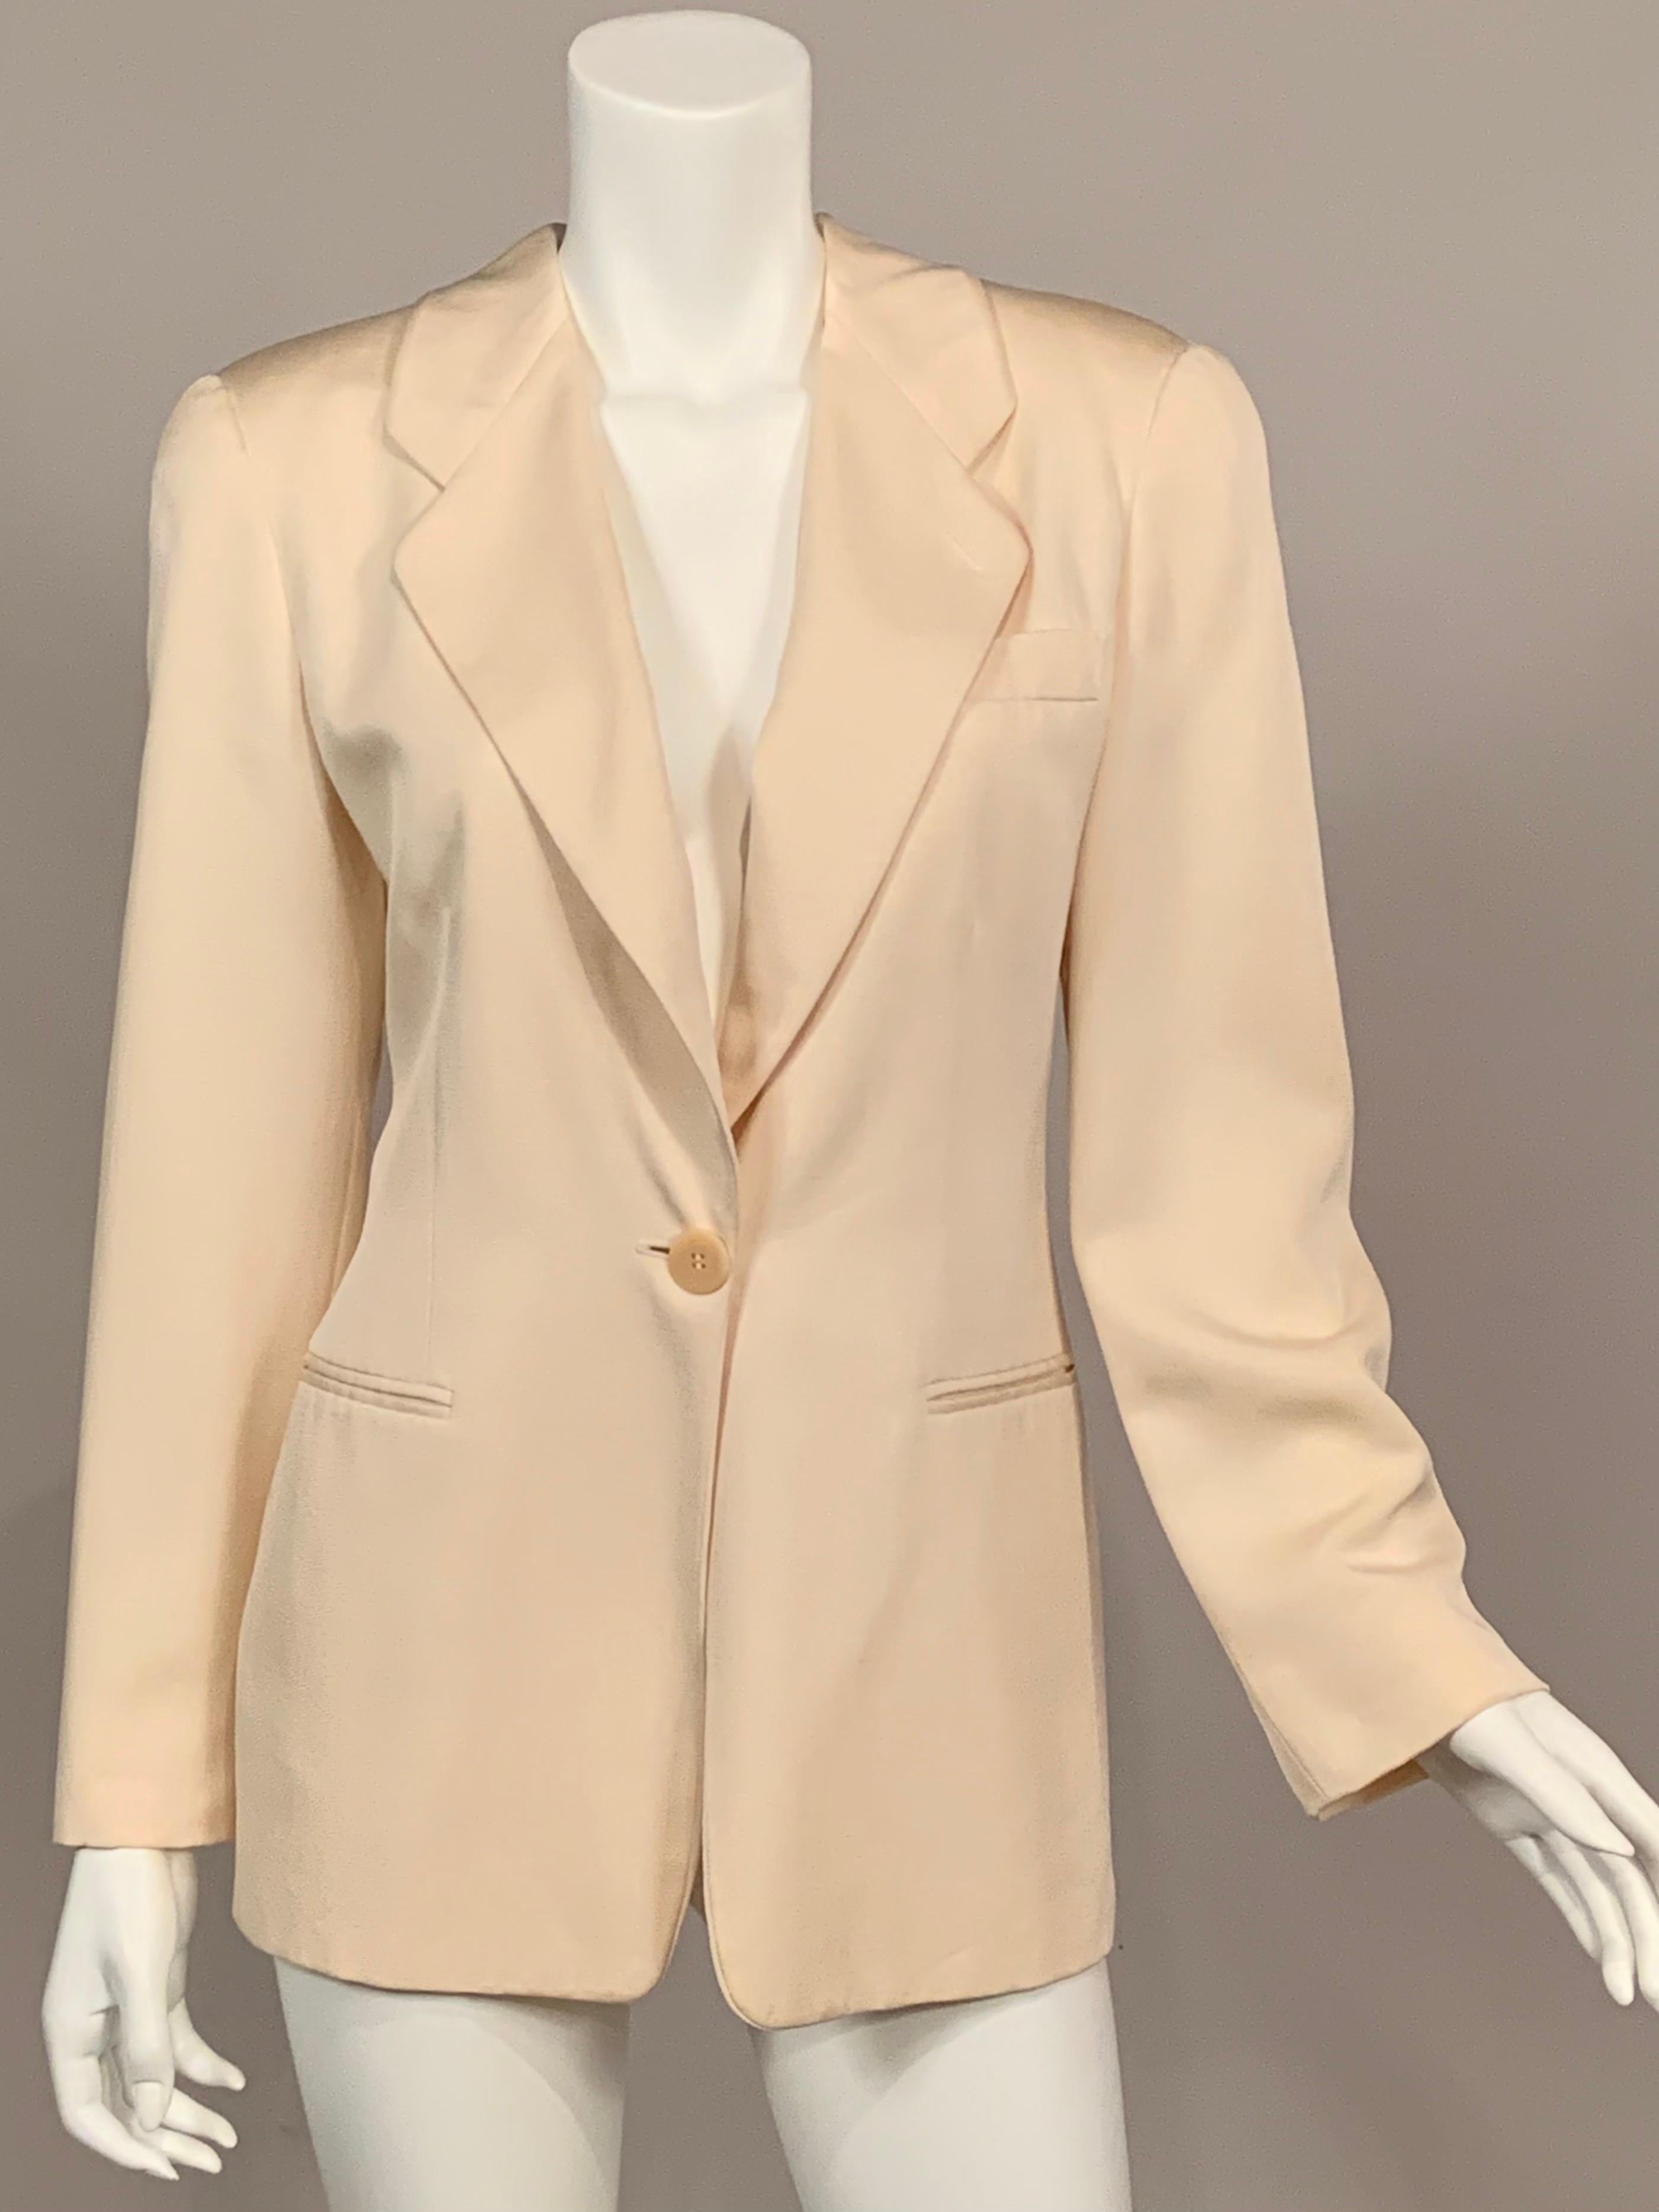 Giorgio Armani has updated the classic one button blazer in cream silk with notched lapels, one breast pocket and two hip pockets, [all still stitched closed], and a single button on each cuff. The jacket is lined in a matching silk blend and it is